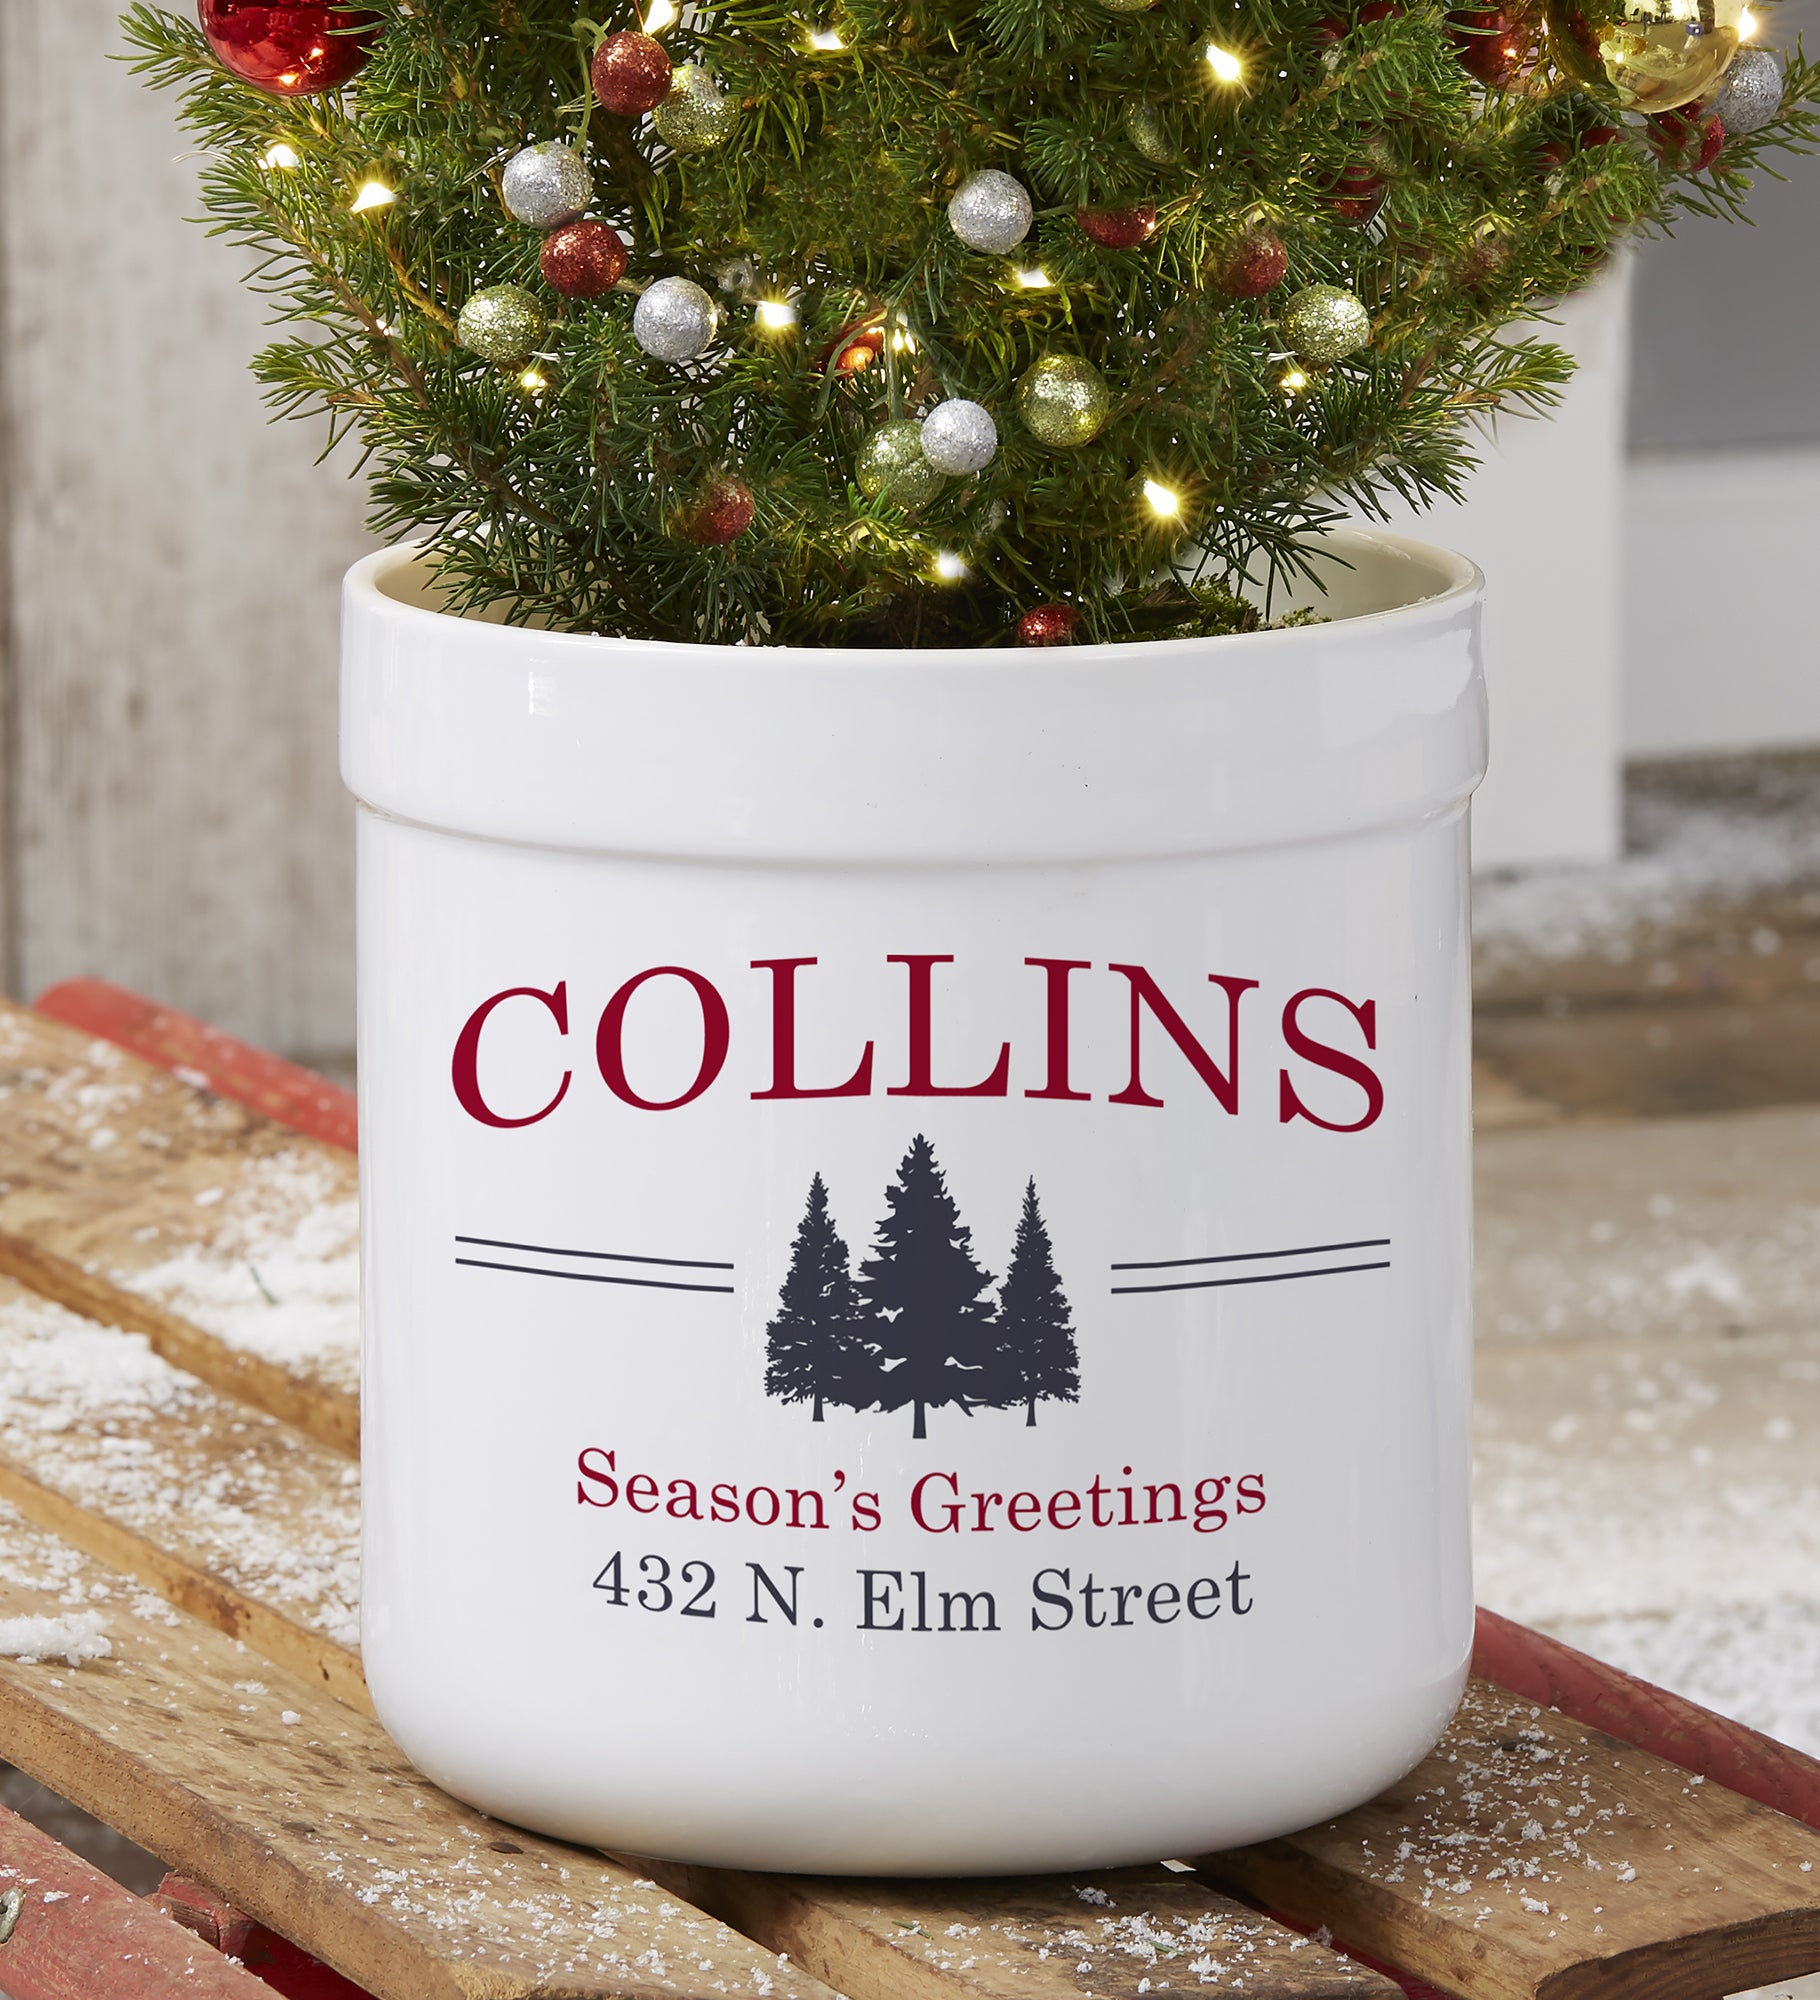 Vintage Holiday Personalized Outdoor Flower Pot